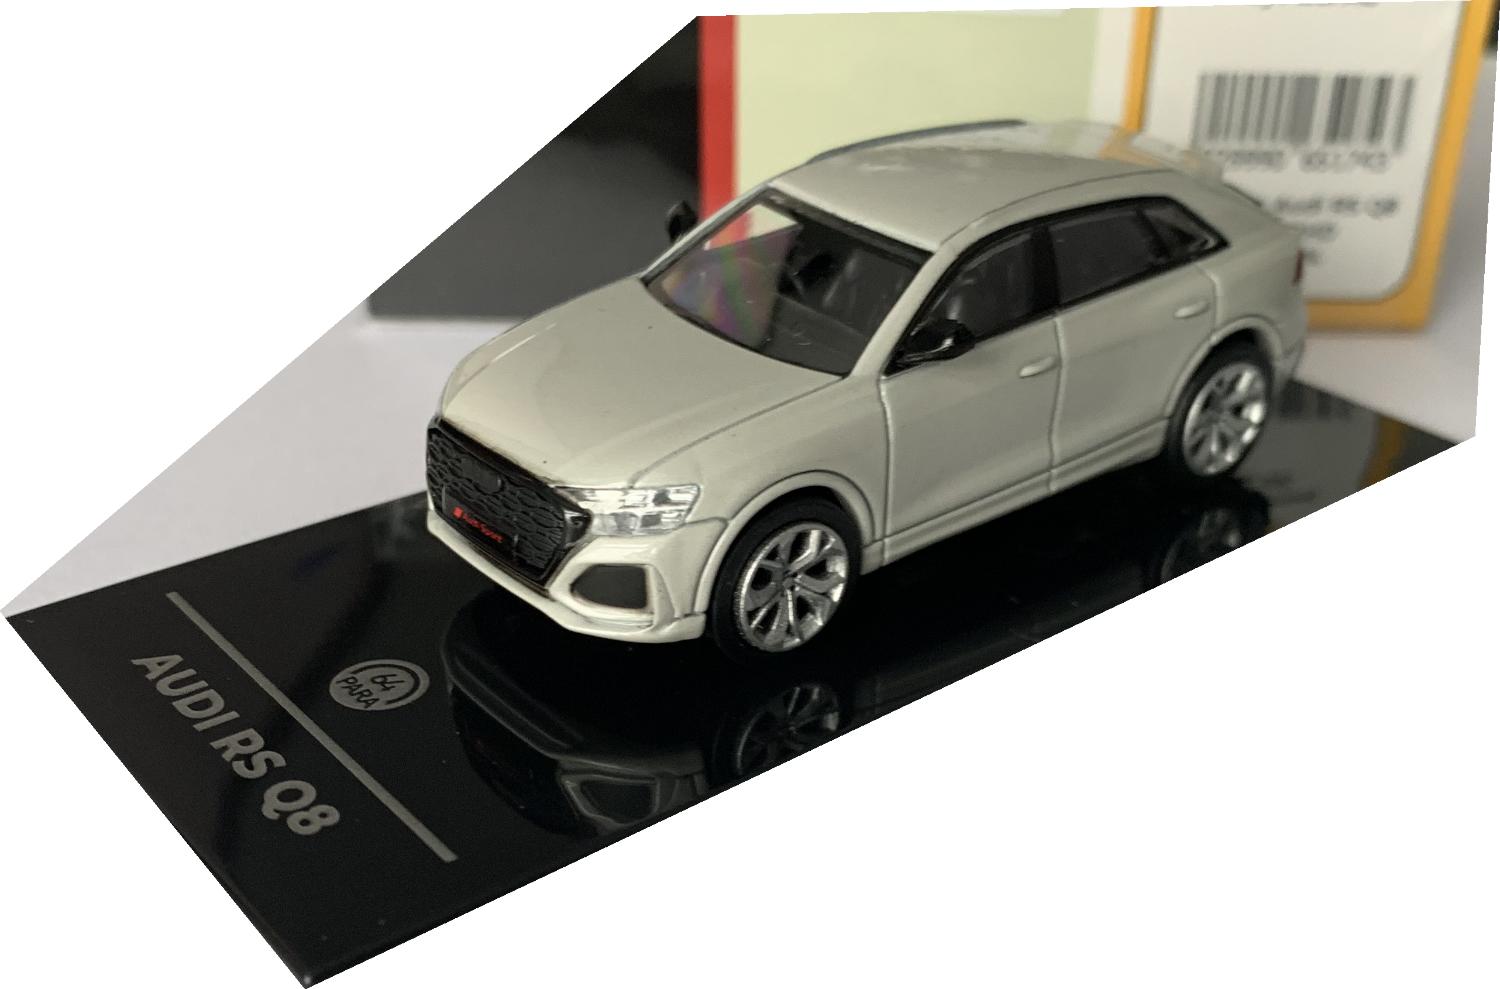 A good reproduction of the Audi RS Q8 mounted on a removable plinth and a removable hard plastic cover